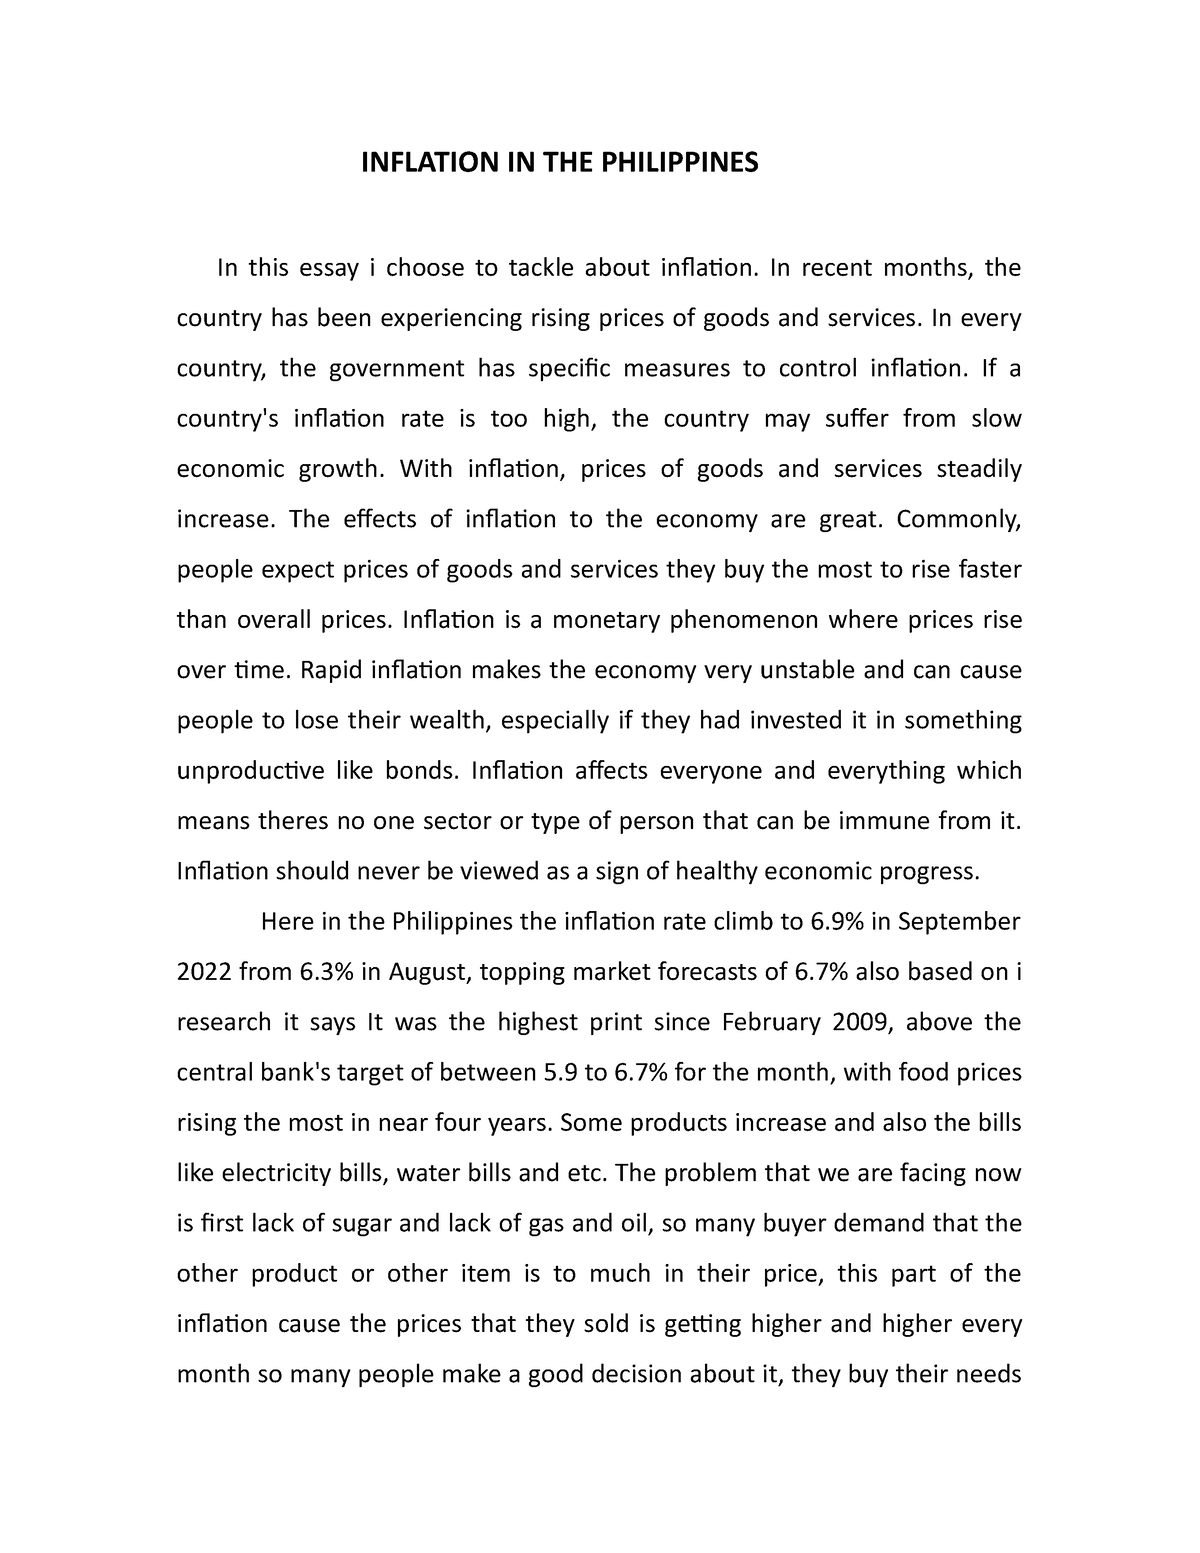 argumentative essay about inflation rate in the philippines